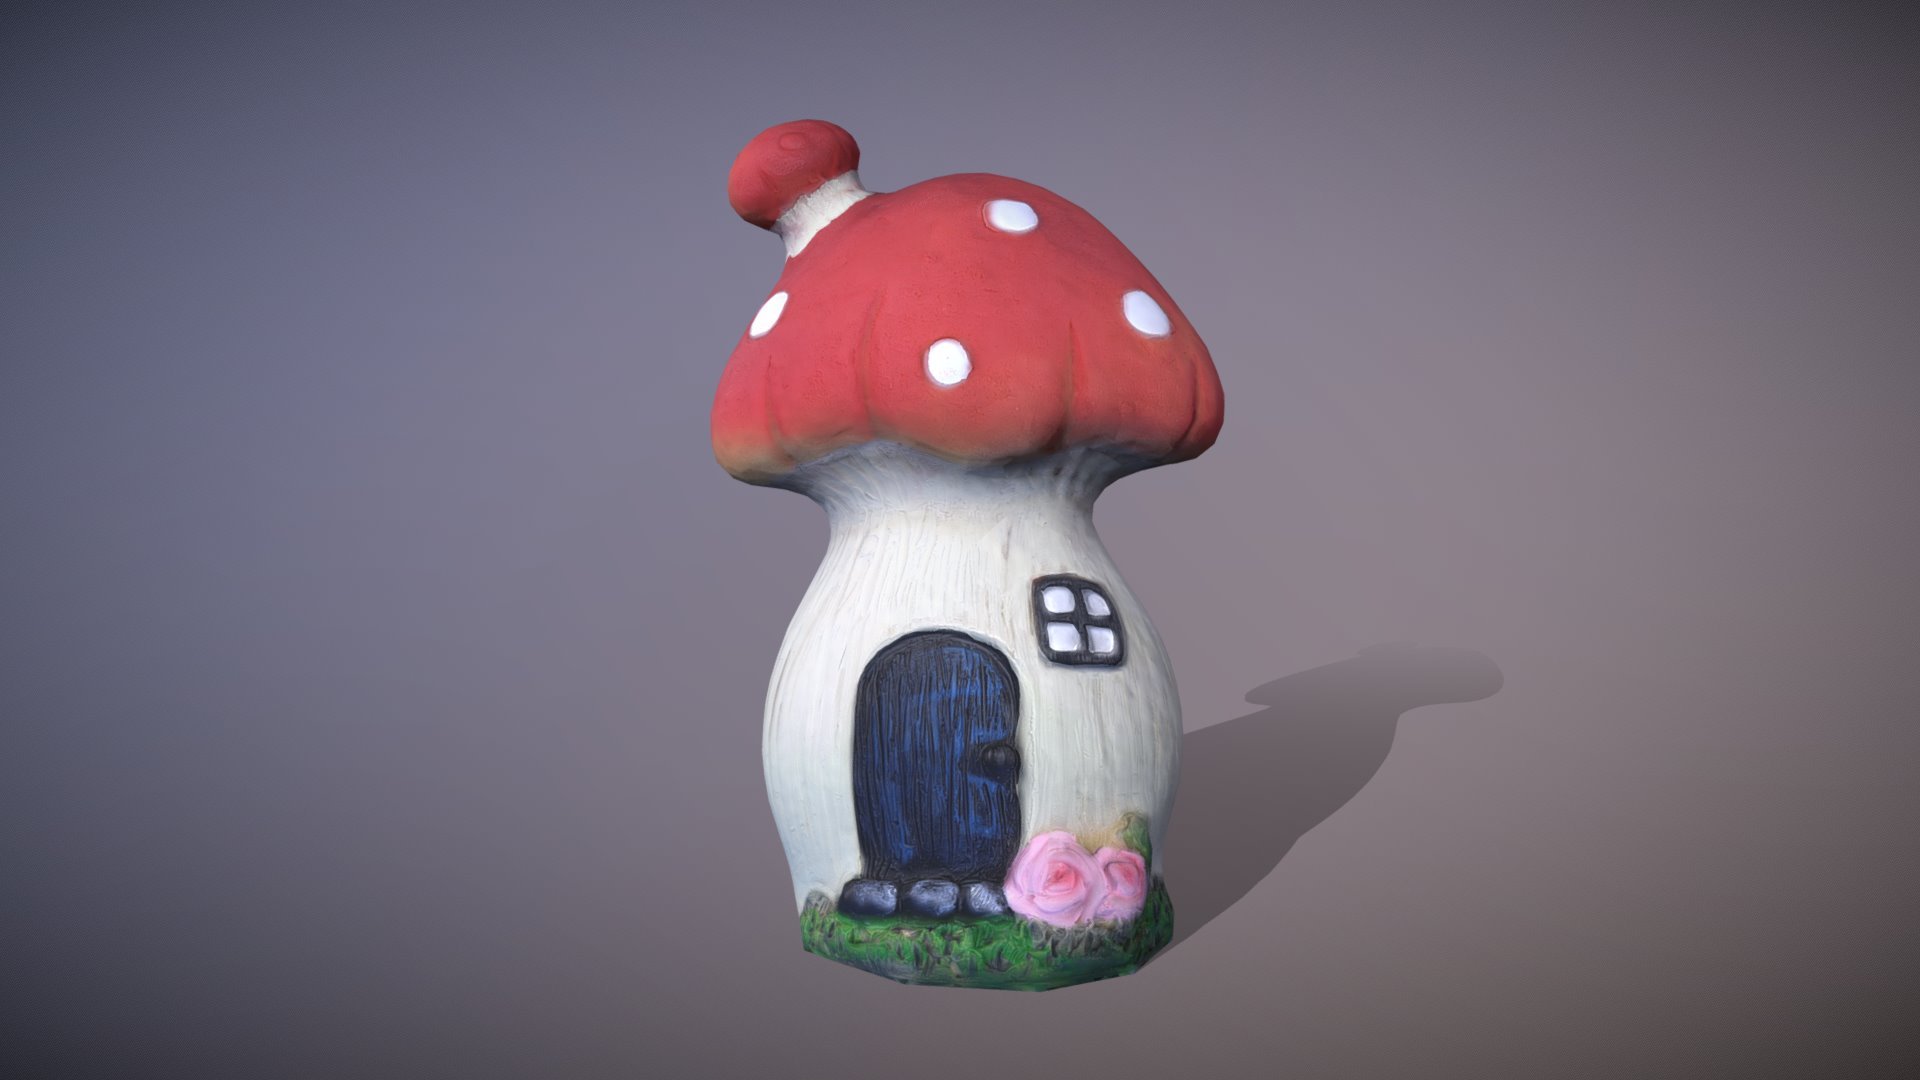 My 3D Mushroom House from photos generated with photogrammetry software 3DF Zephyr v4.523 processing 50 images - Mushroom House - Download Free 3D model by Horton 3d model